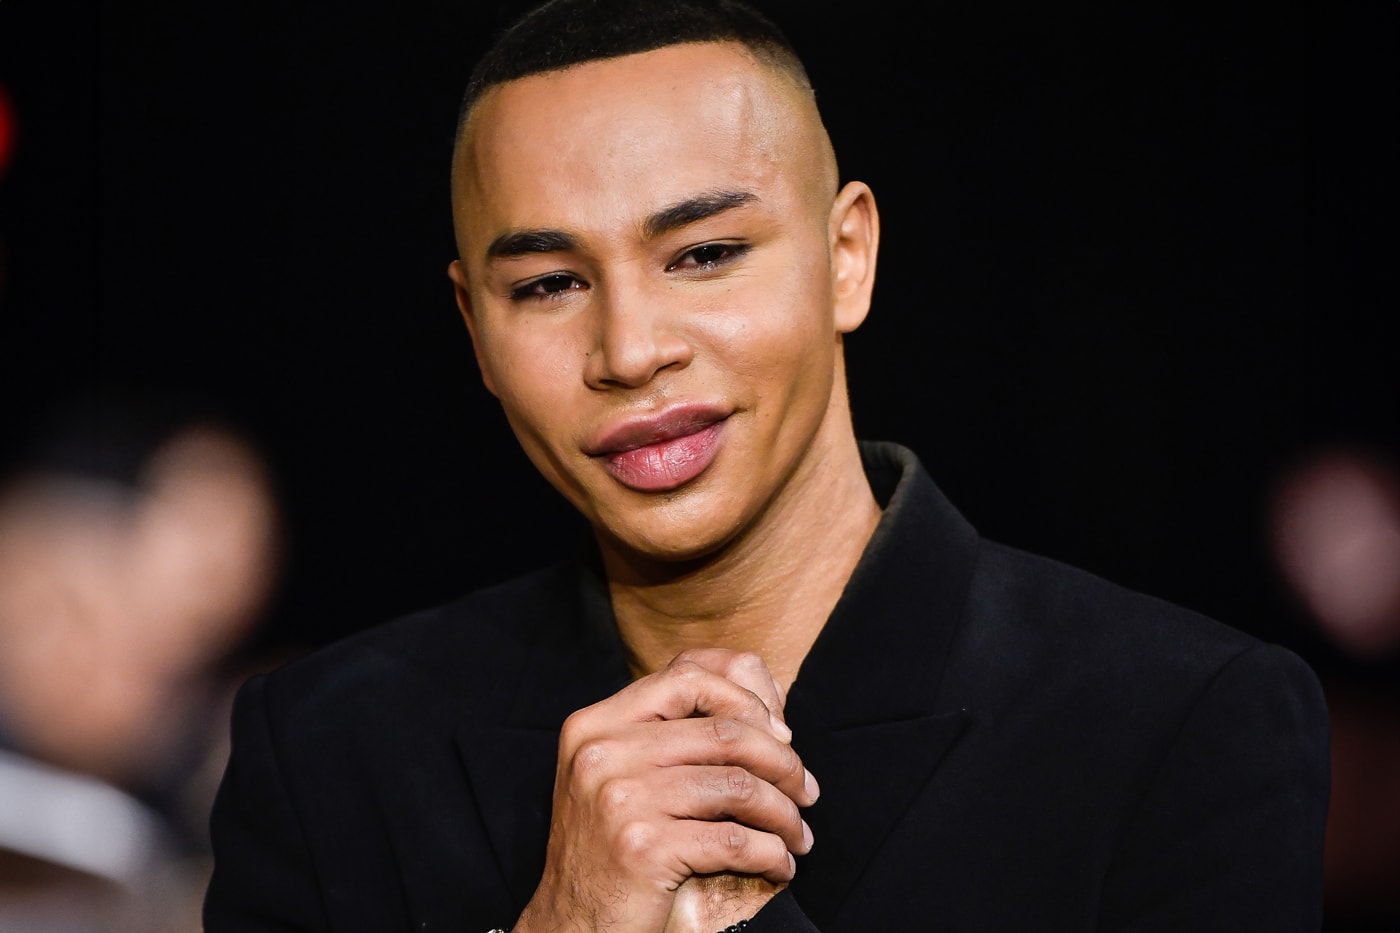 Over 50 Balmain Pieces Have Been Stolen Ahead of Paris Fashion Week Show olivier rousteing designer instagram hijacked delivery truck